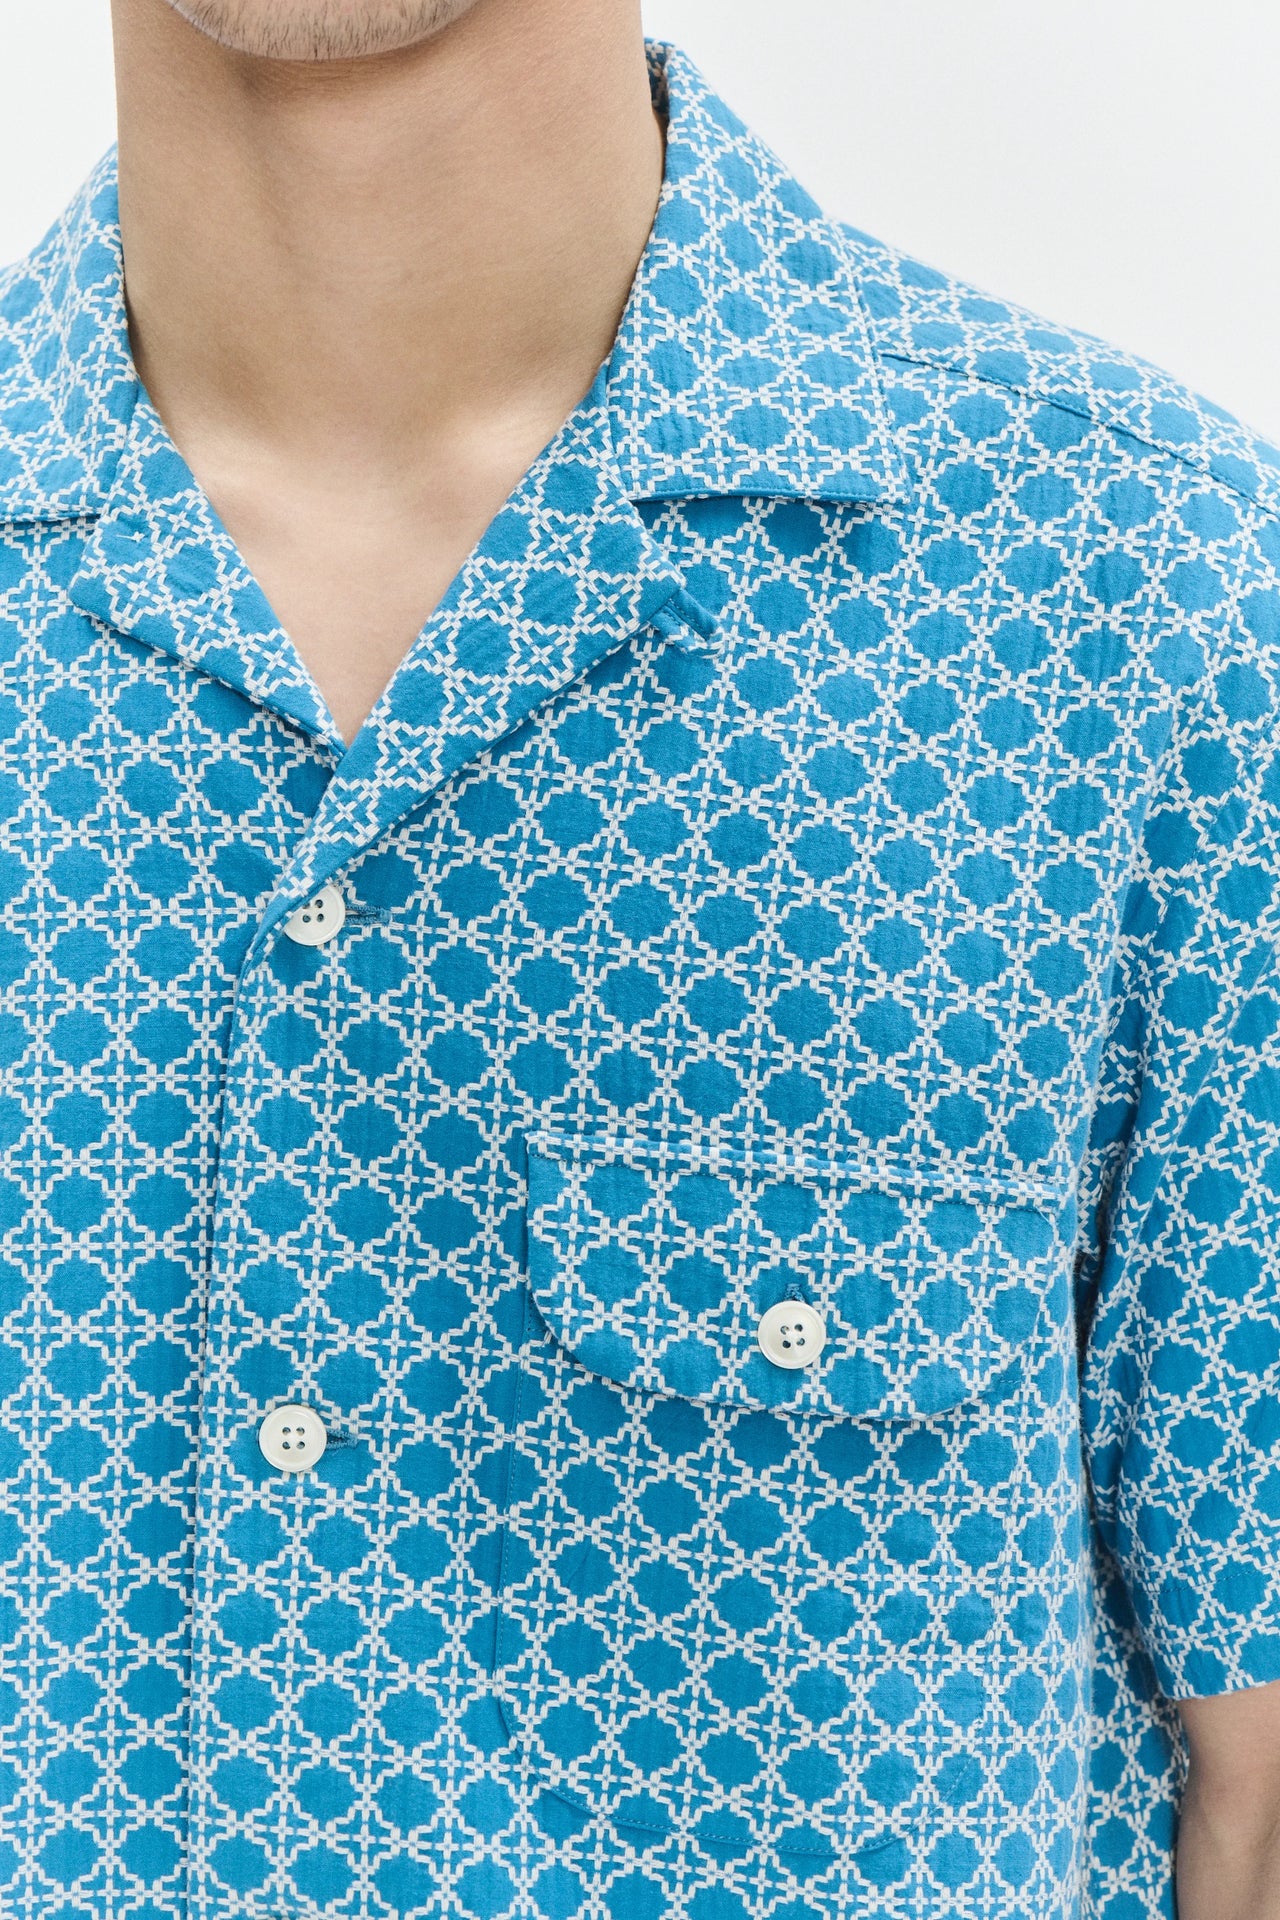 Short Sleeve Camp Collar Shirt in a Vibrant Turquoise Blue Jacquard Portuguese Cotton